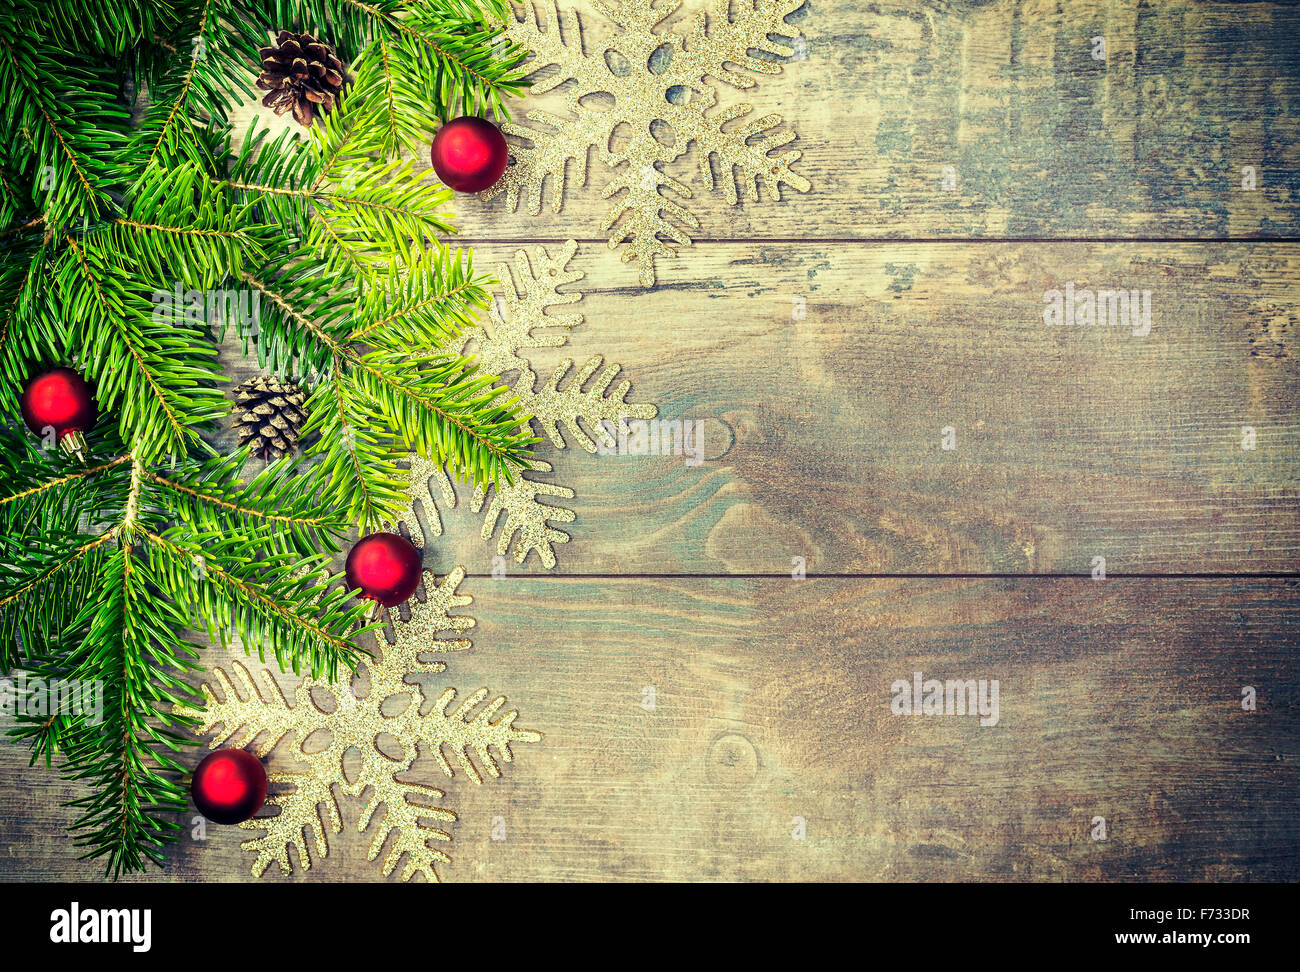 Retro toned Christmas decorations on an old wooden table, copy space, shallow depth of field. Stock Photo